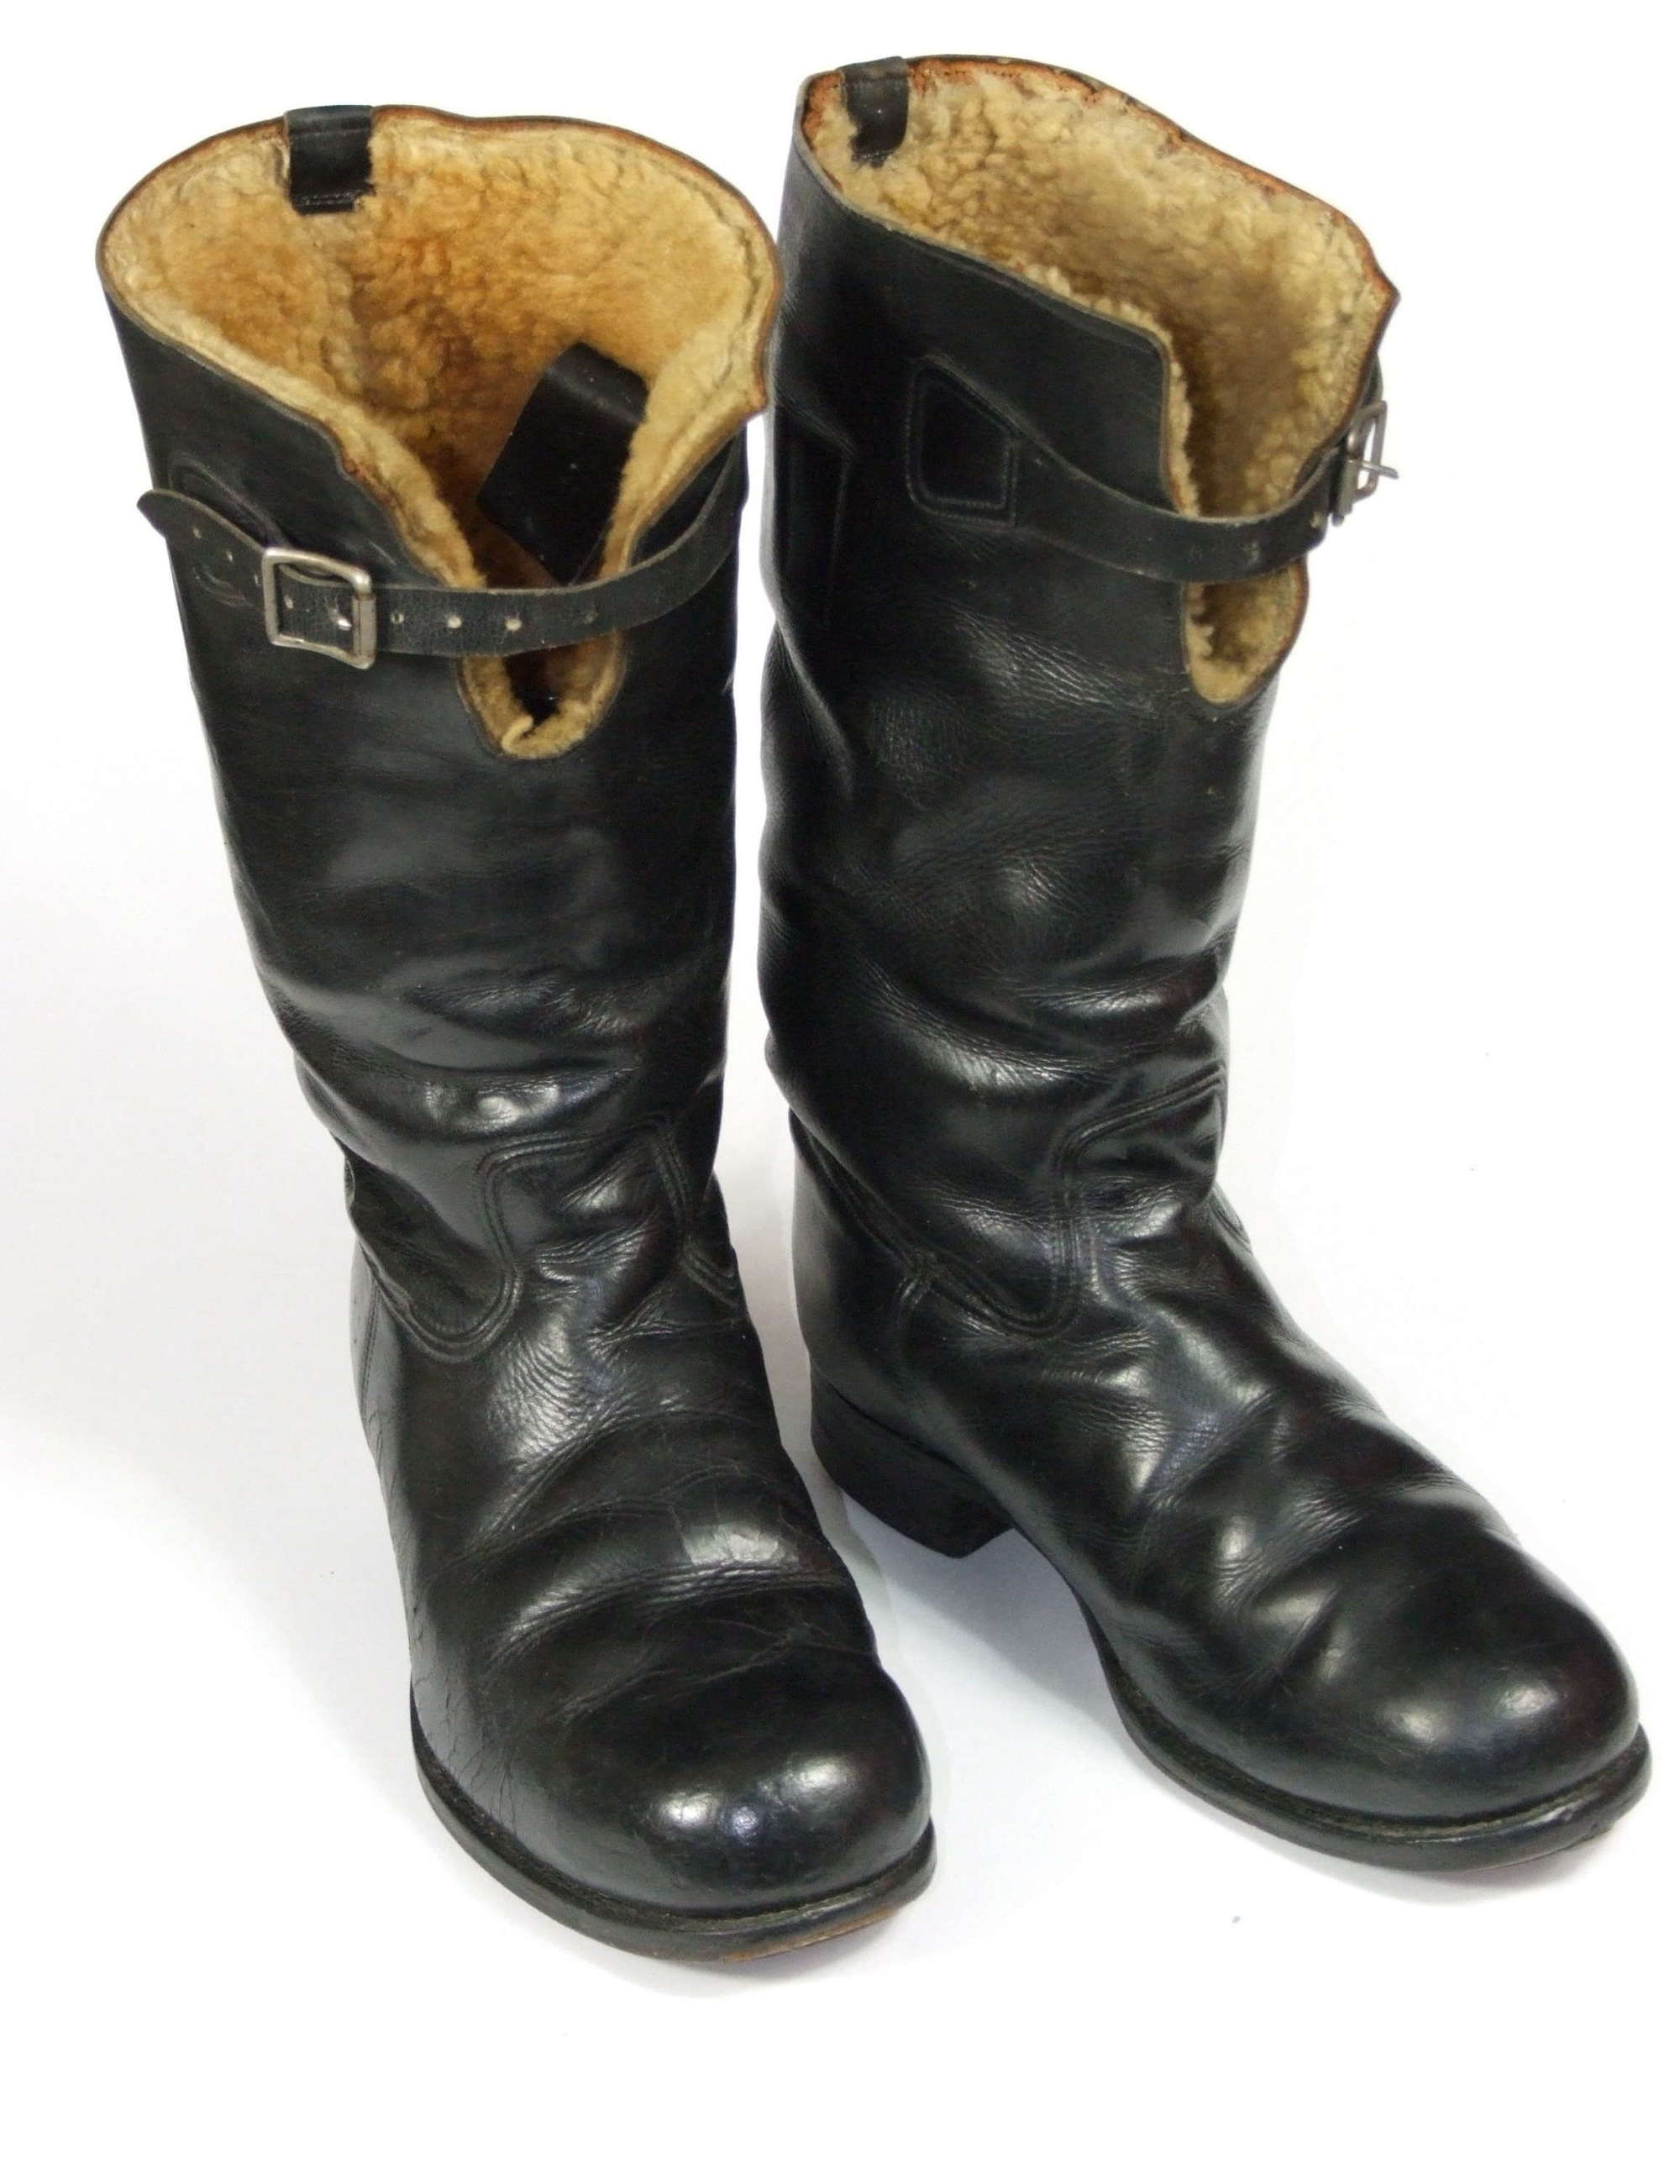 RAAF 36 Pattern Boots 624 Special Duties Squadron